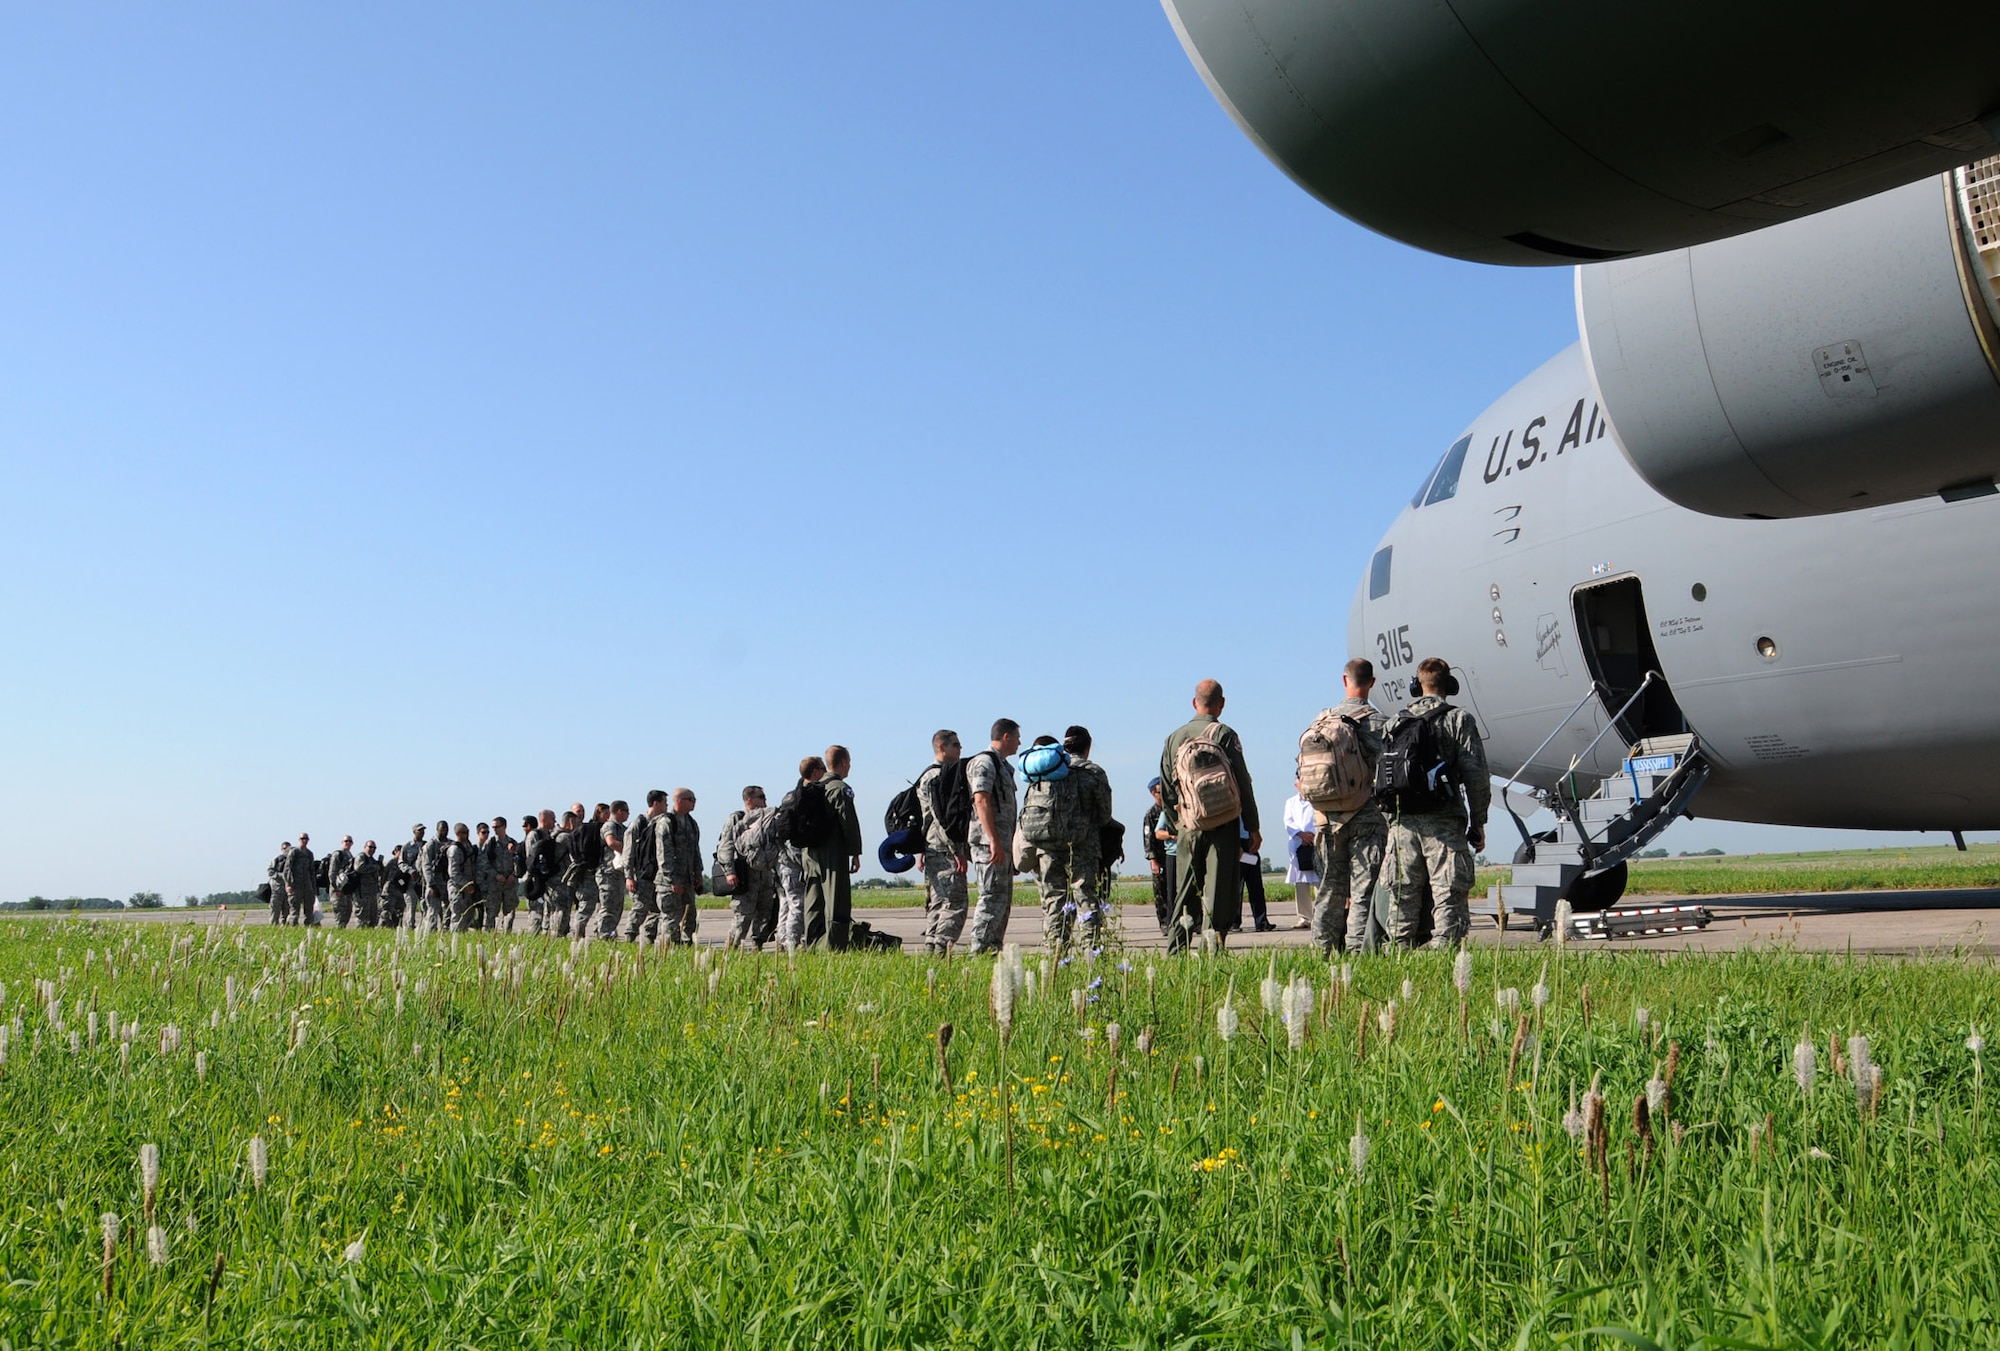 Members of the California and the Alabama Air National Guard arrive at Mirgorod Air Base, Ukraine, July 16, 2011, to take part in SAFE SKIES 2011.  SAFE SKIES 2011 is a military-to-military exchange between airmen from the U.S., Ukraine and Poland to enhance airspace security over the Ukraine and Poland in preparation for EURO 2012, the European soccer championship games. (U. S. Air Force photo/Tech. Sgt. Charles Vaughn)